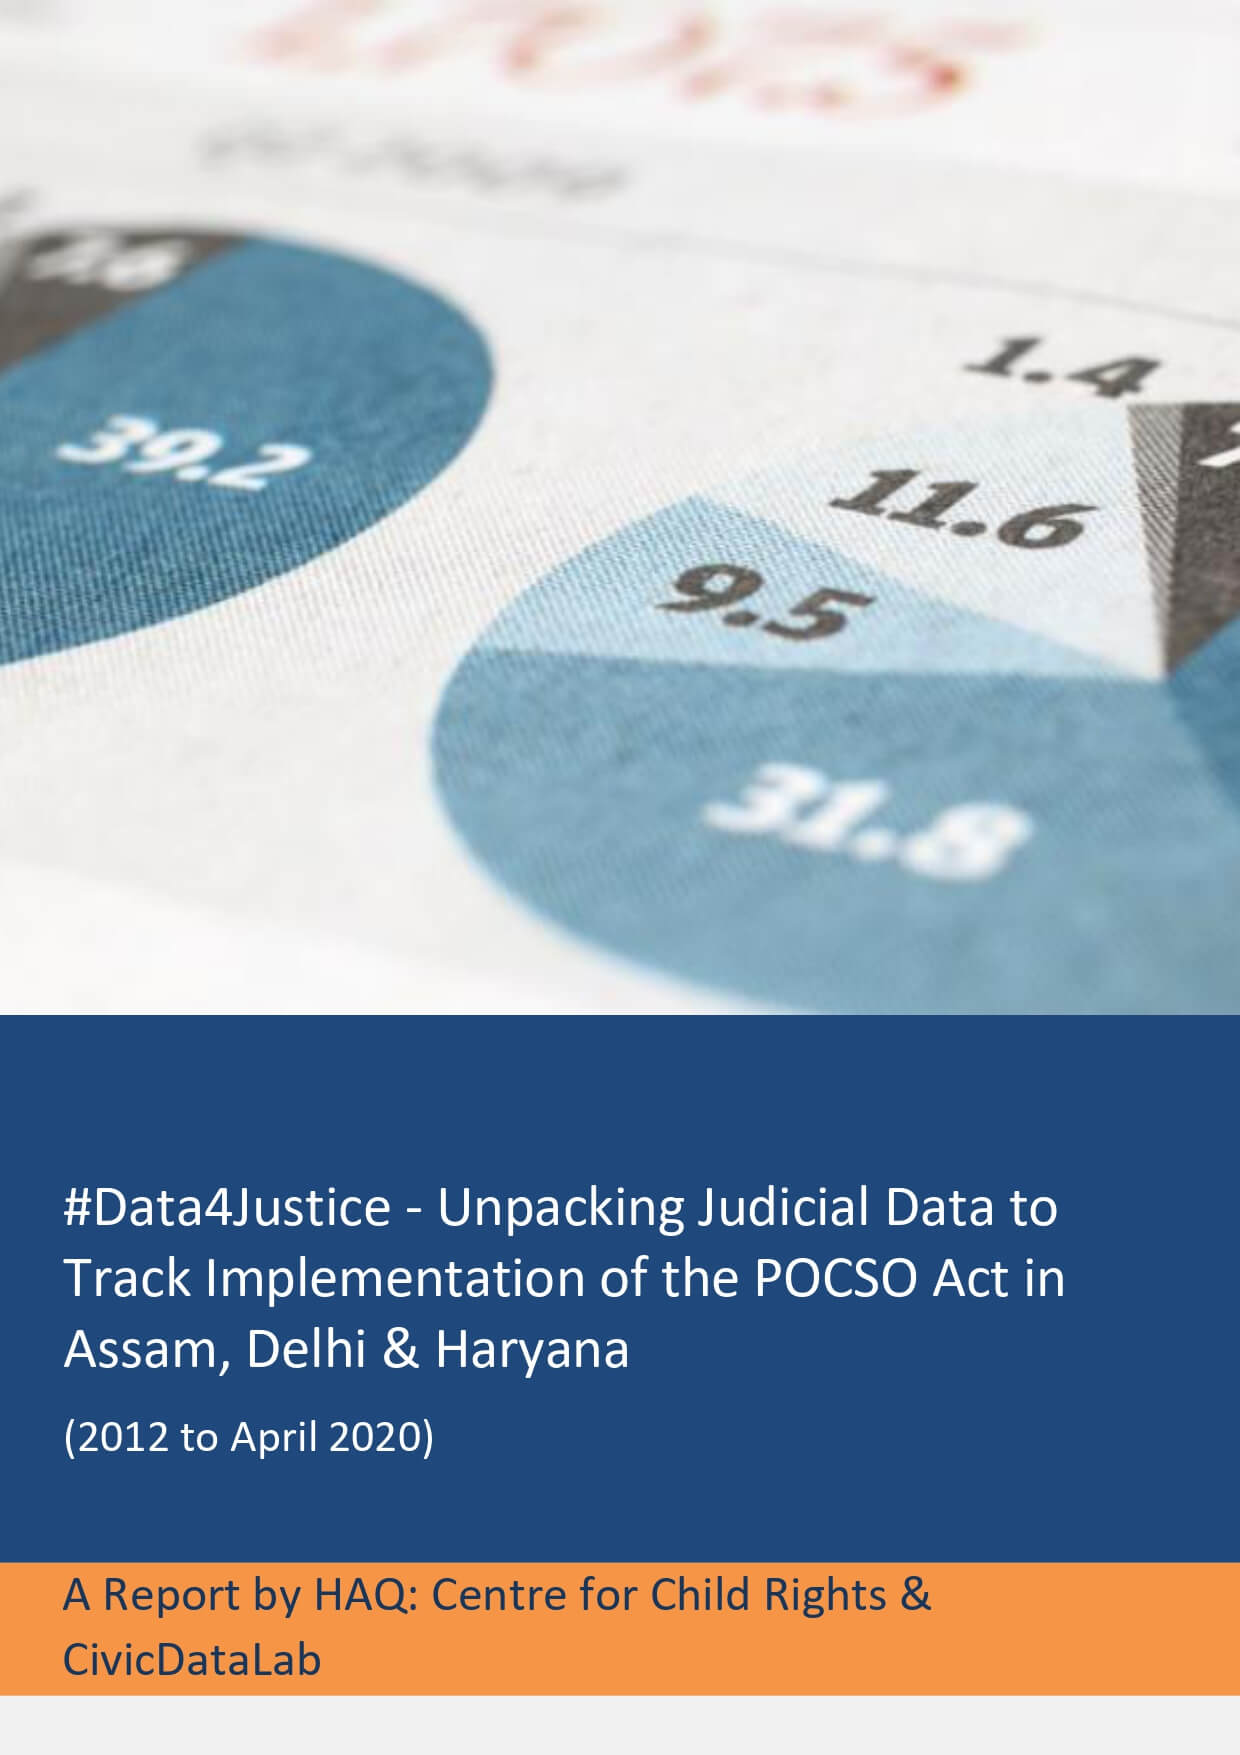 Unpacking Judicial Data to Track Implementation of the POCSO Act in Assam, Delhi & Haryana (2012 to April 2020)